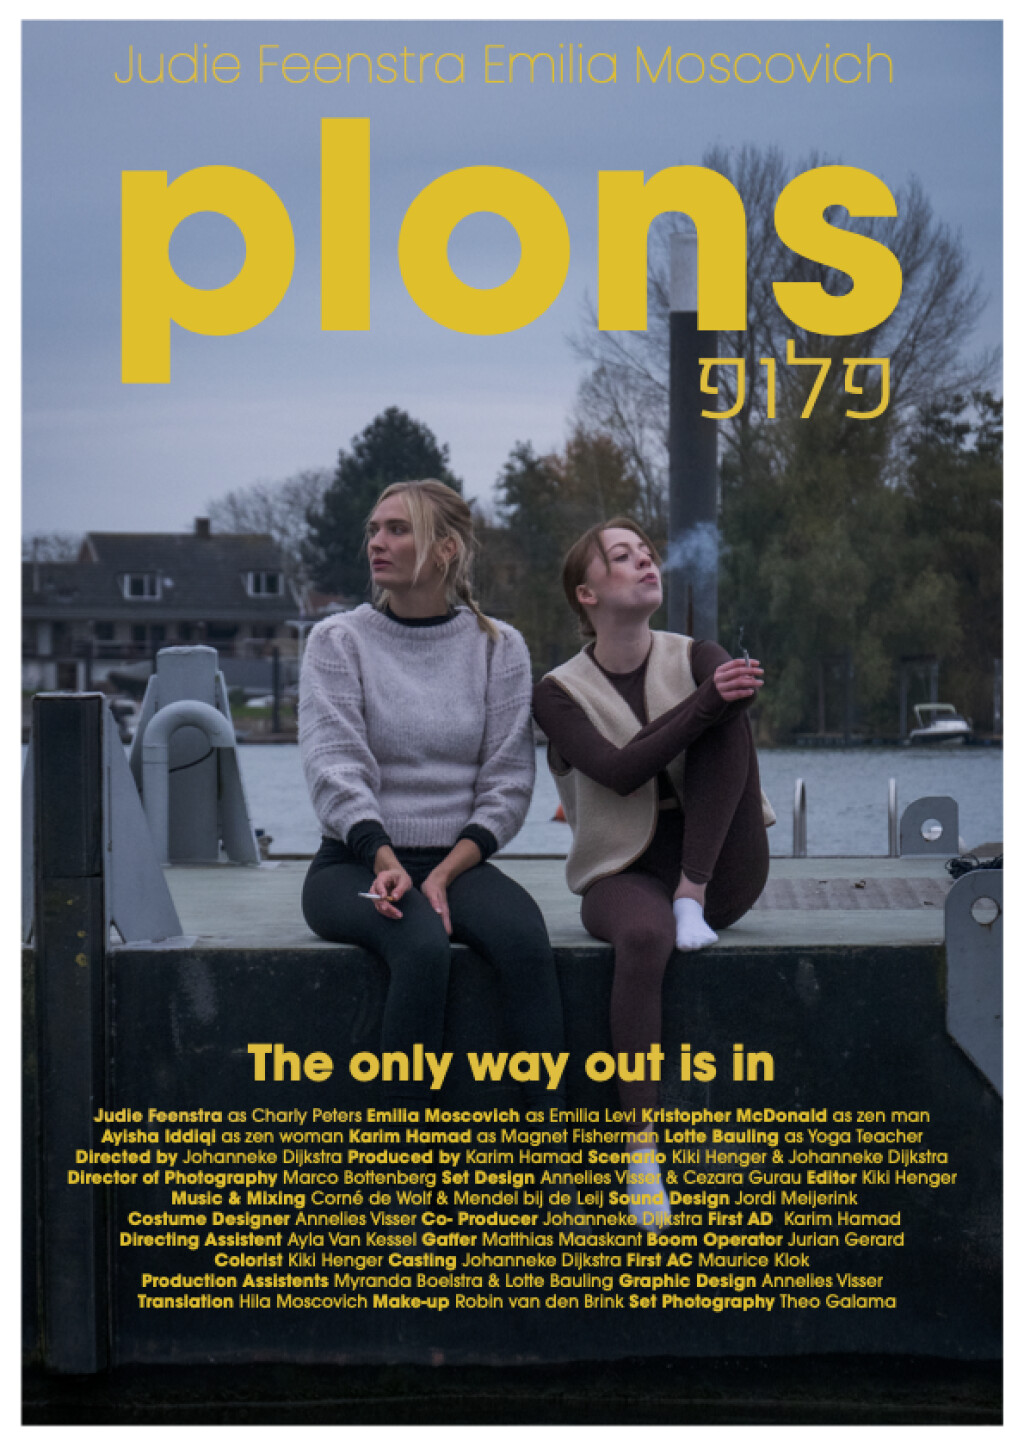 Filmposter for Plons